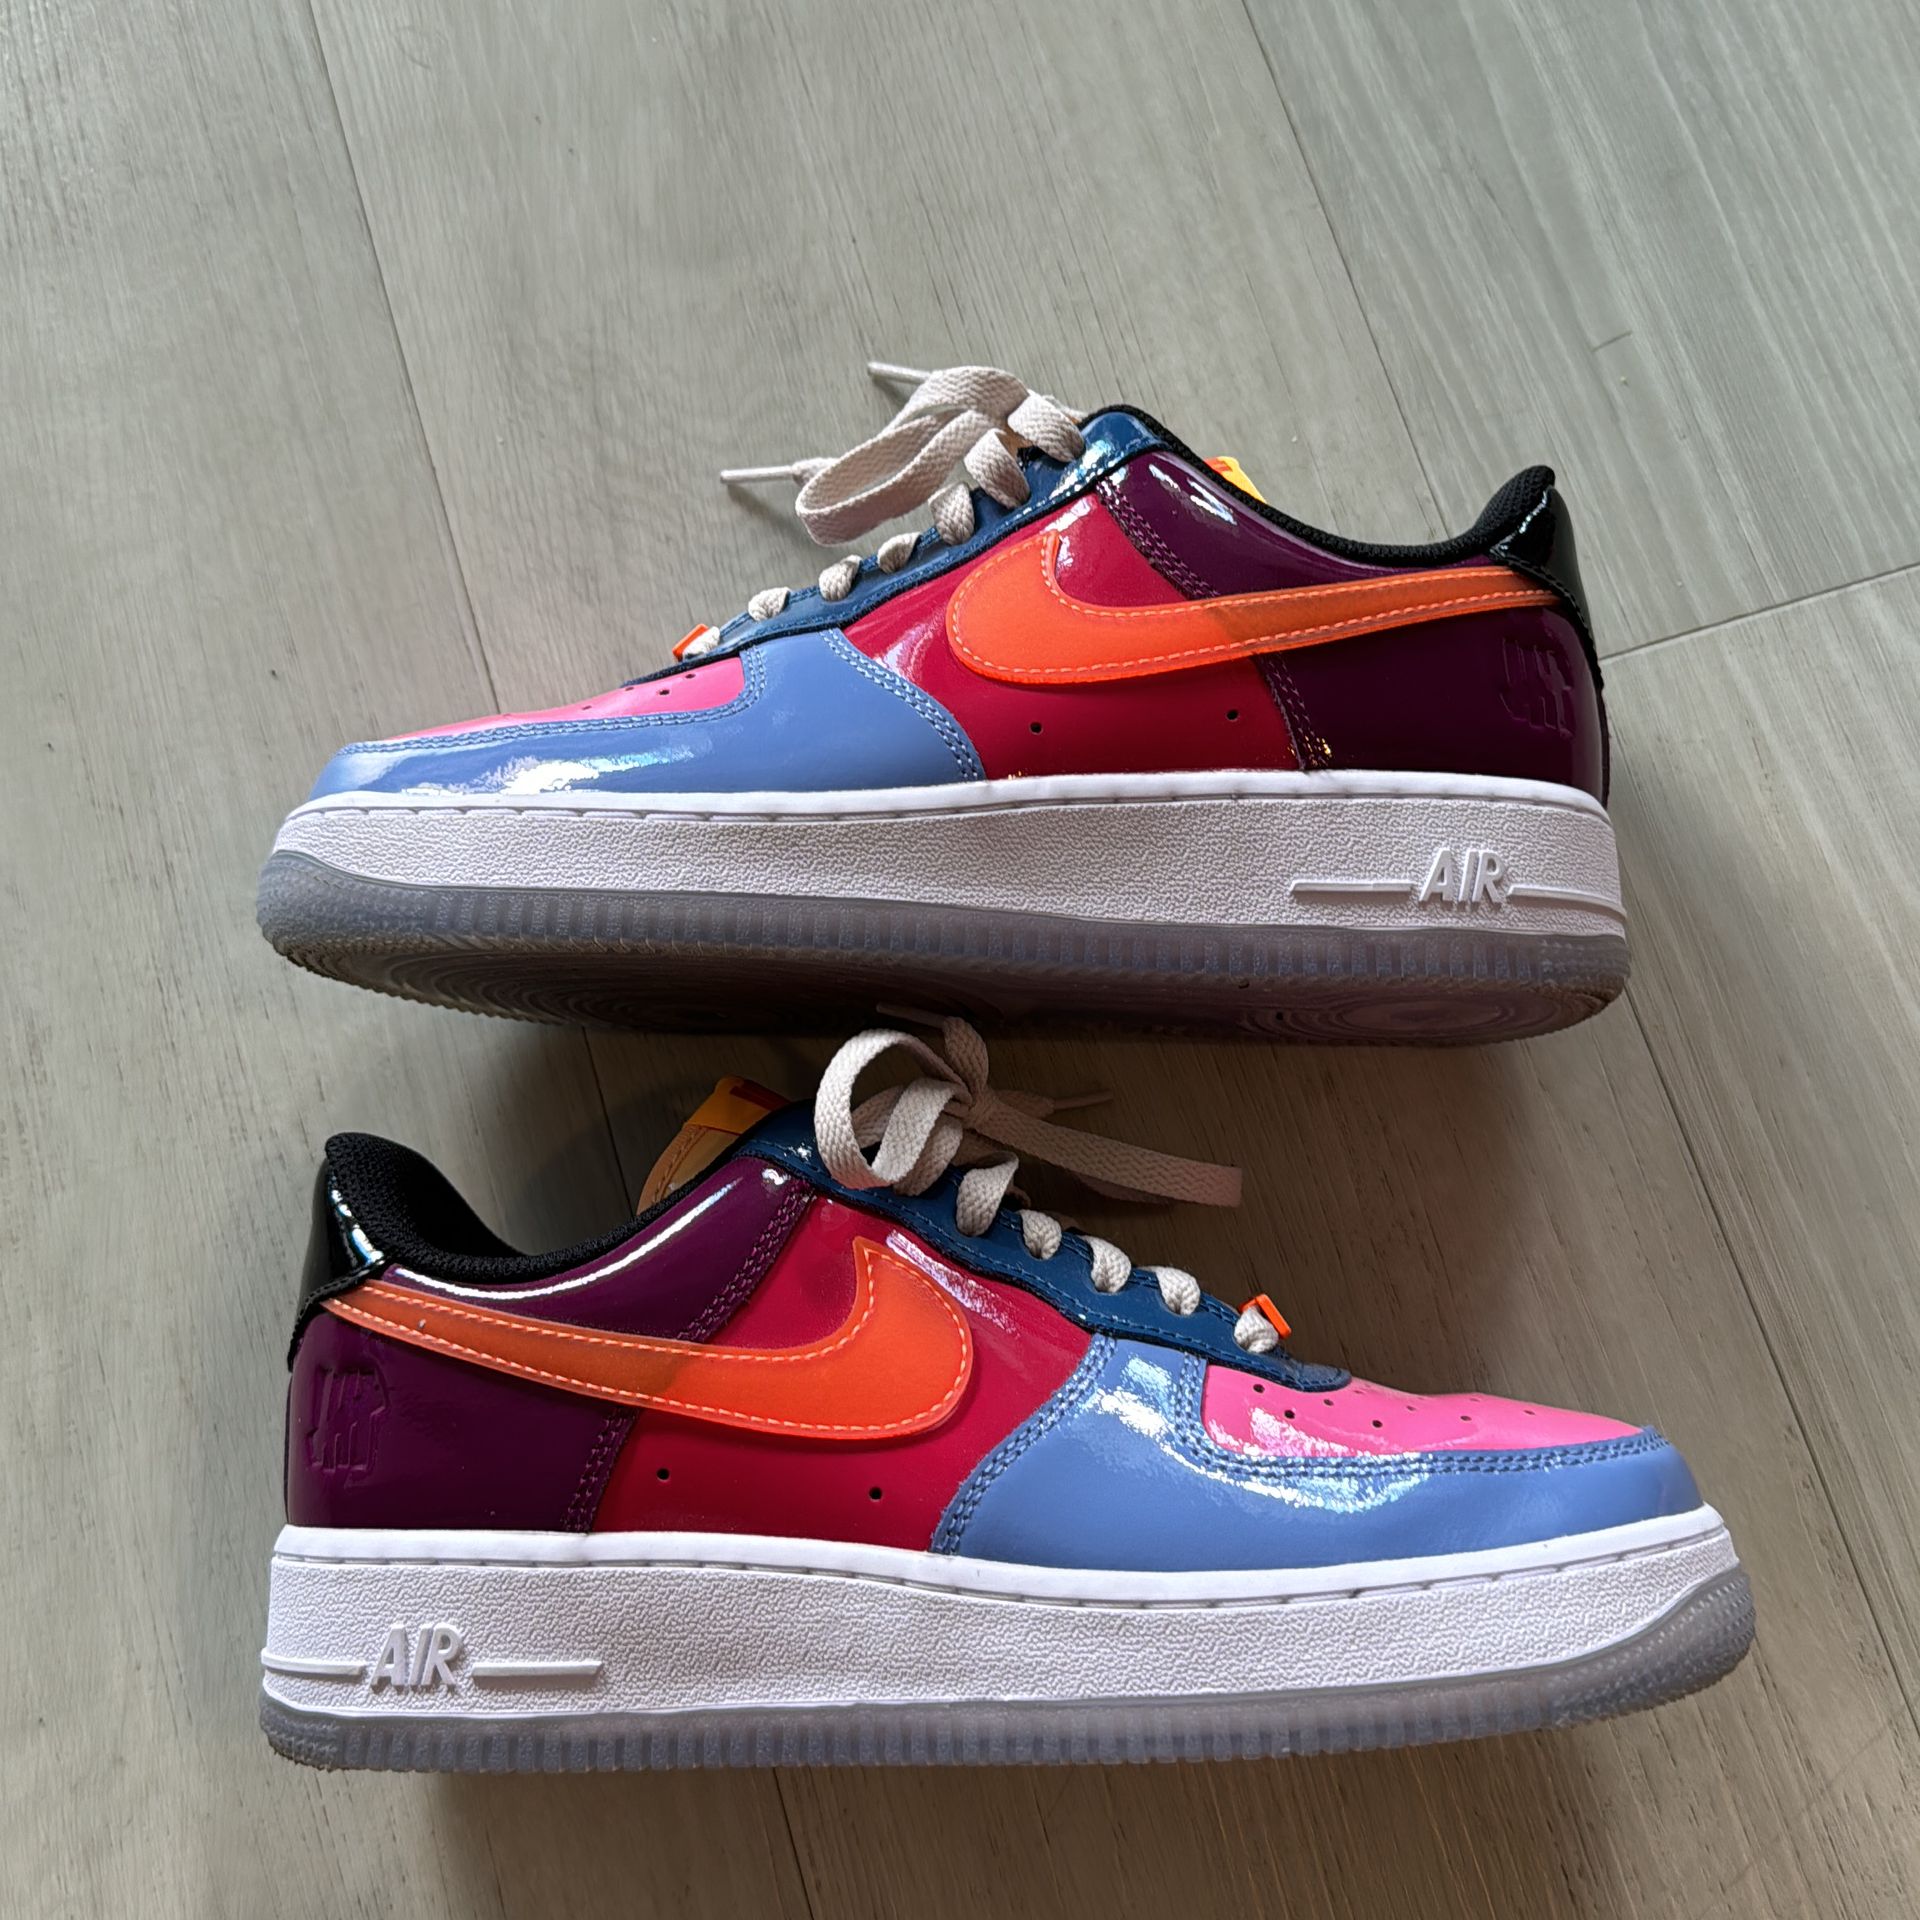 Undefeated x Nike Air Force 1 Low 'Total Orange'